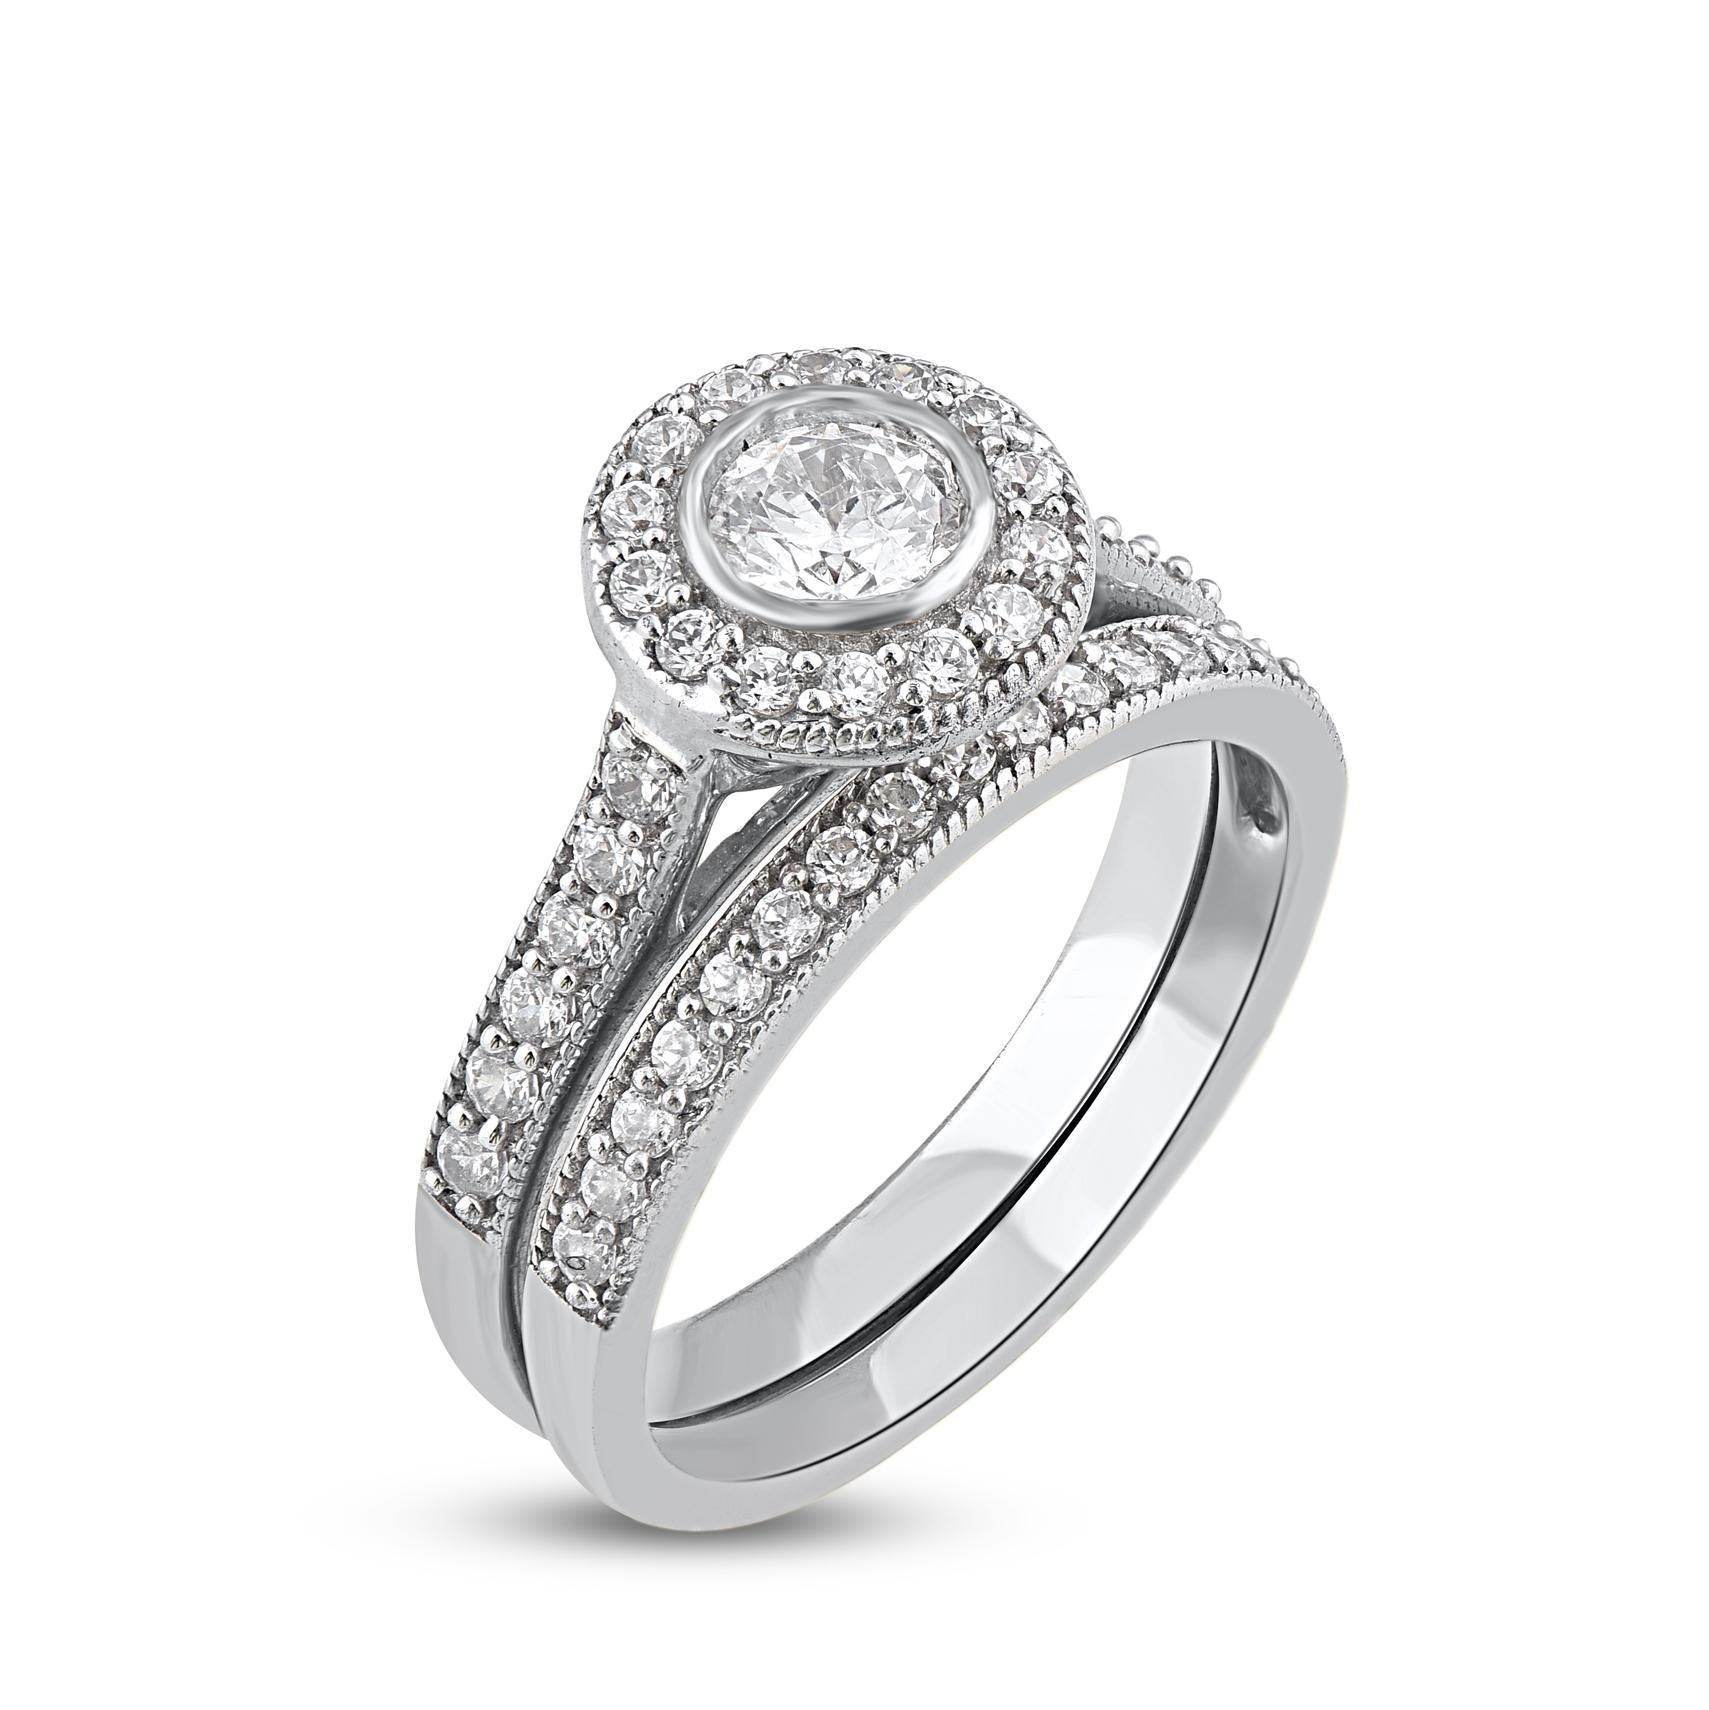 Express your love for her in the most classic way with this diamond ring set. Crafted in 14 Karat white gold, This wedding ring features a sparkling 44 brilliant cut round diamond beautifully set in bezel & pave setting. The total diamond weight is